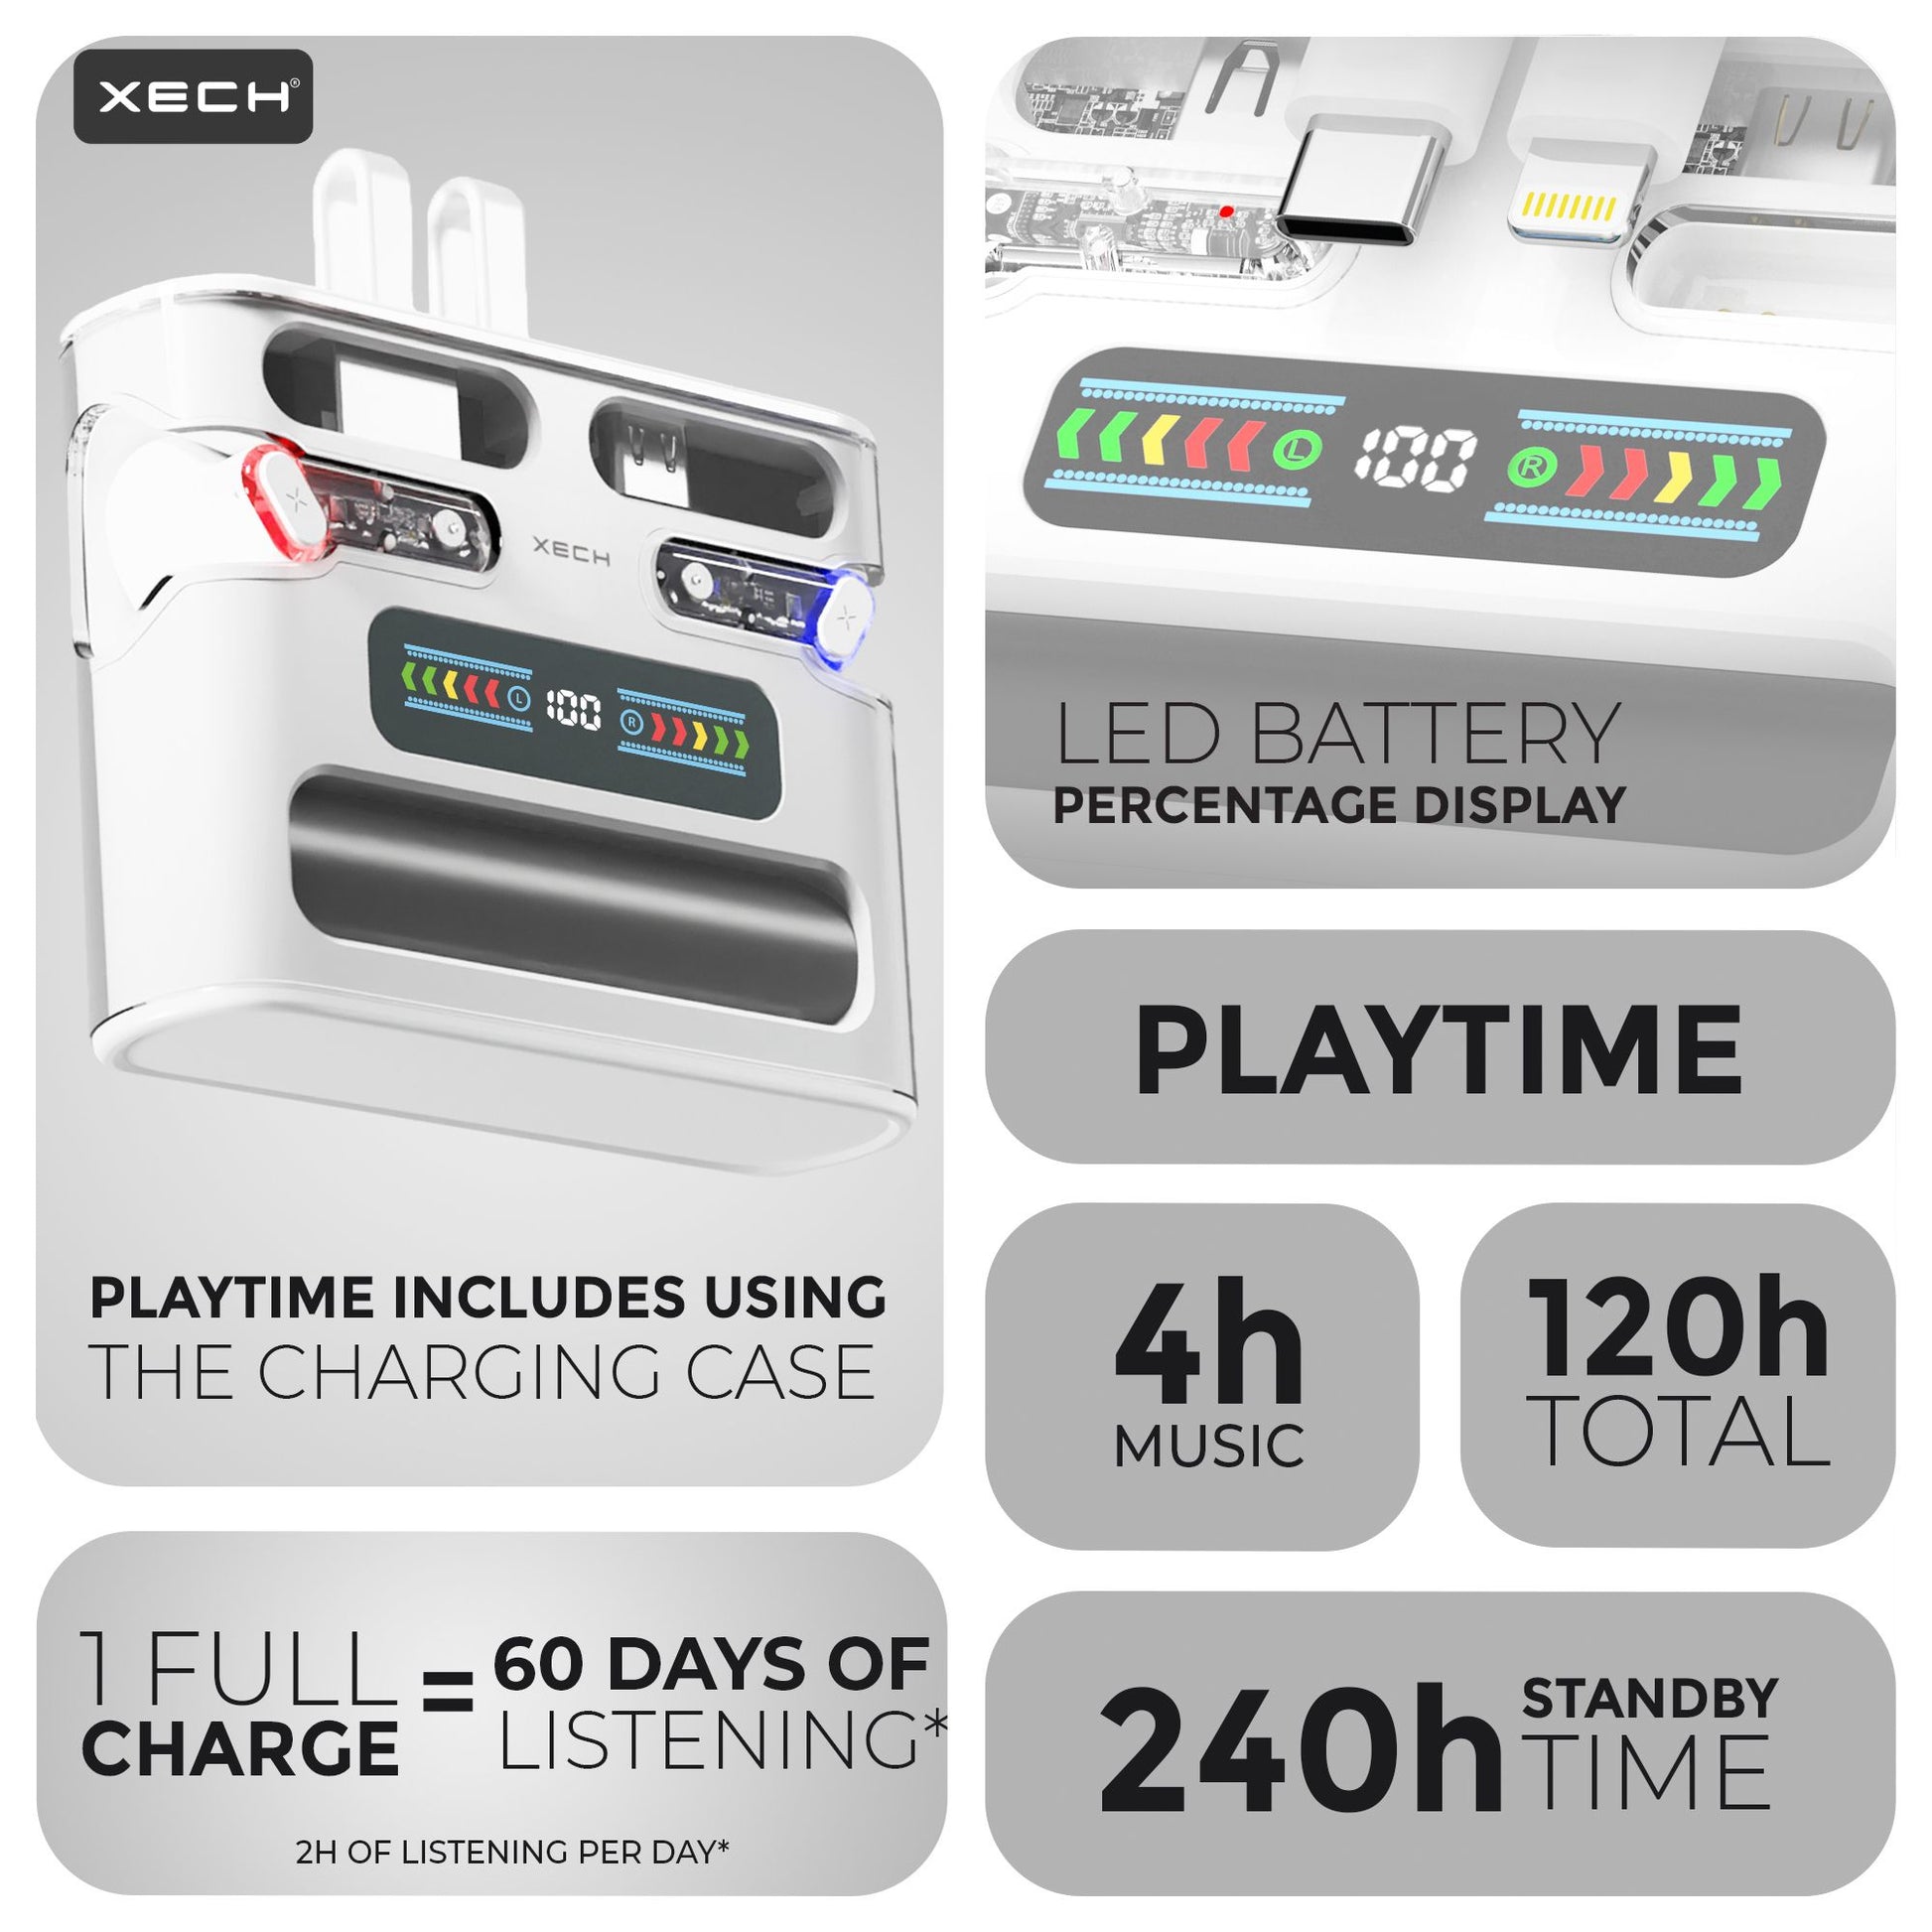 Best TWS earpods in under 2000 by XECH is clearpods with its nothing inspired transparent body and longest play time by any TWS